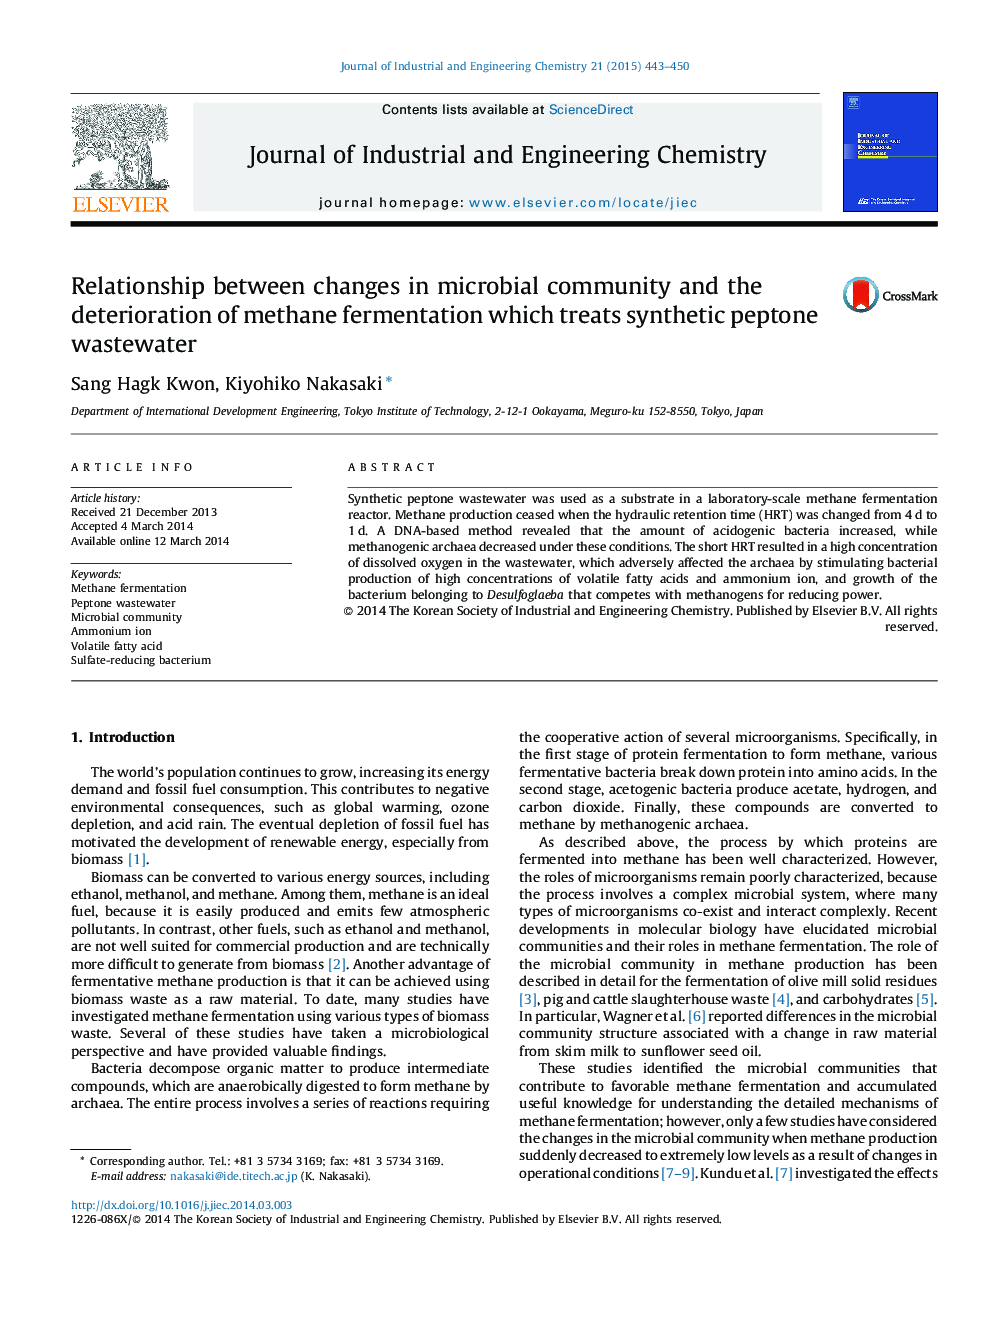 Relationship between changes in microbial community and the deterioration of methane fermentation which treats synthetic peptone wastewater